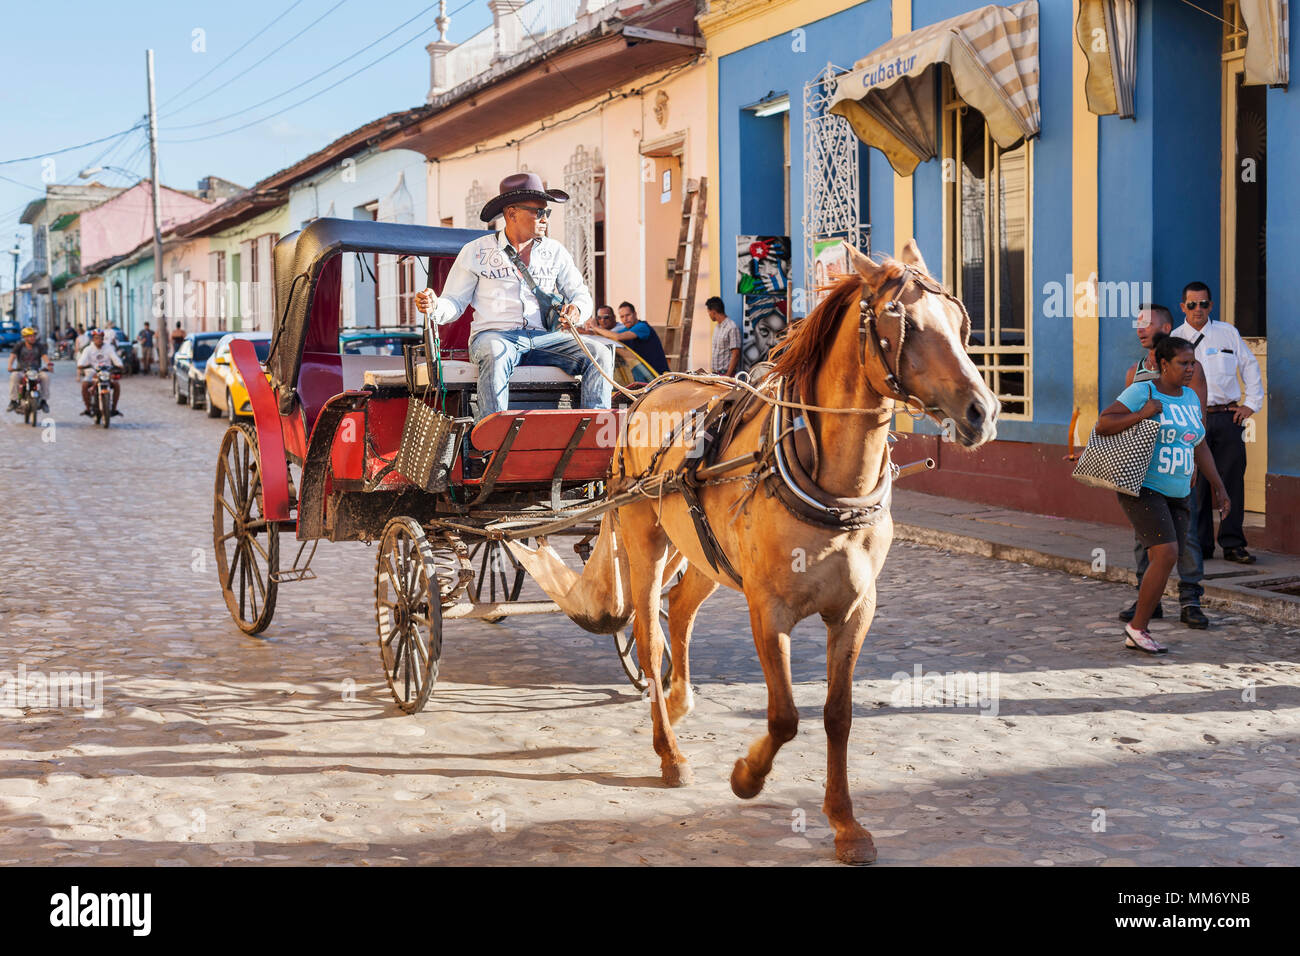 Man riding on horse cart in Trinidad old town, Cuba Stock Photo